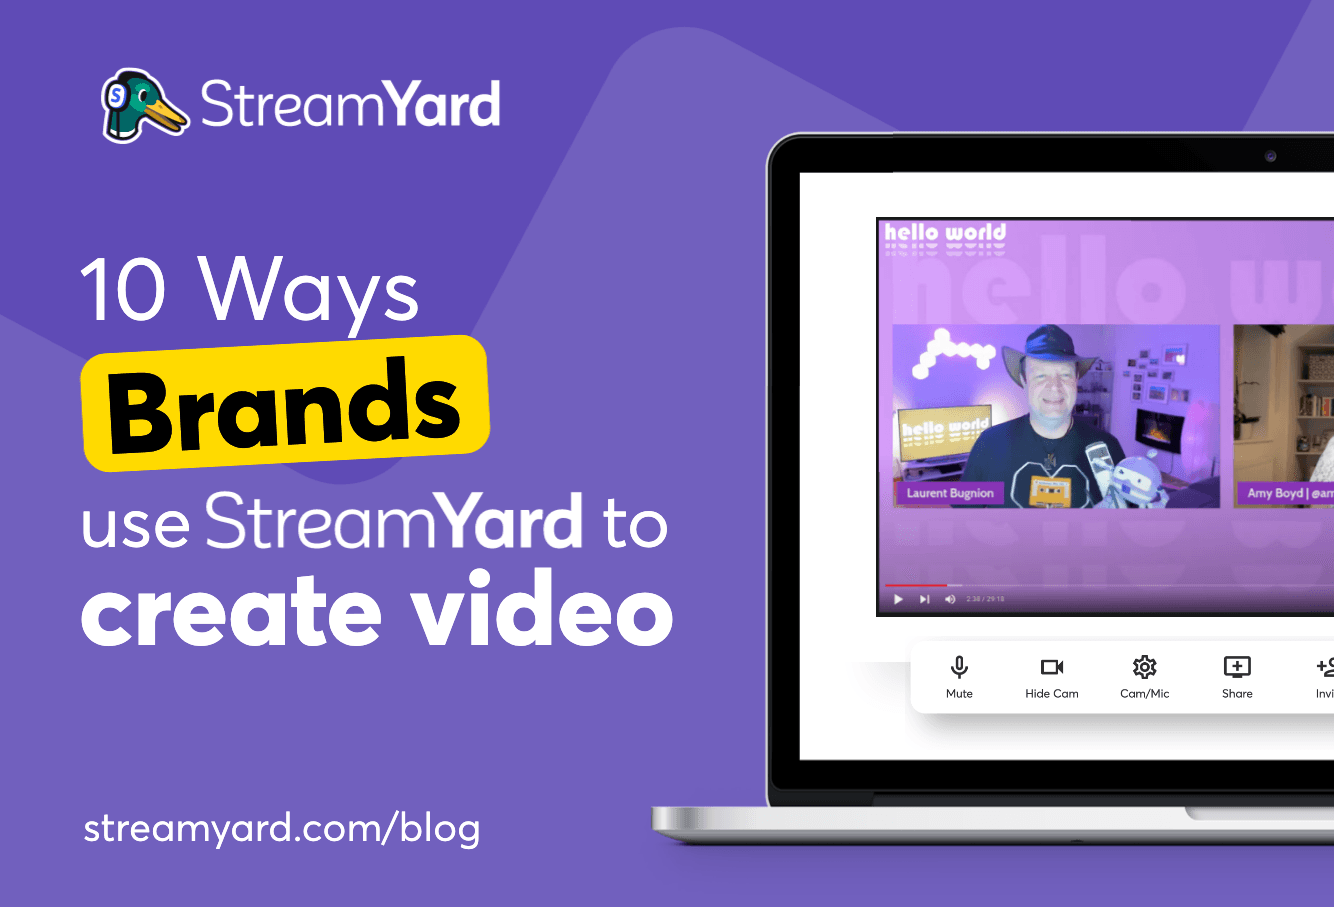 Here’s how brands are catching on to the power of live streaming with StreamYard. Read on to find out how to use StreamYard for your brand.